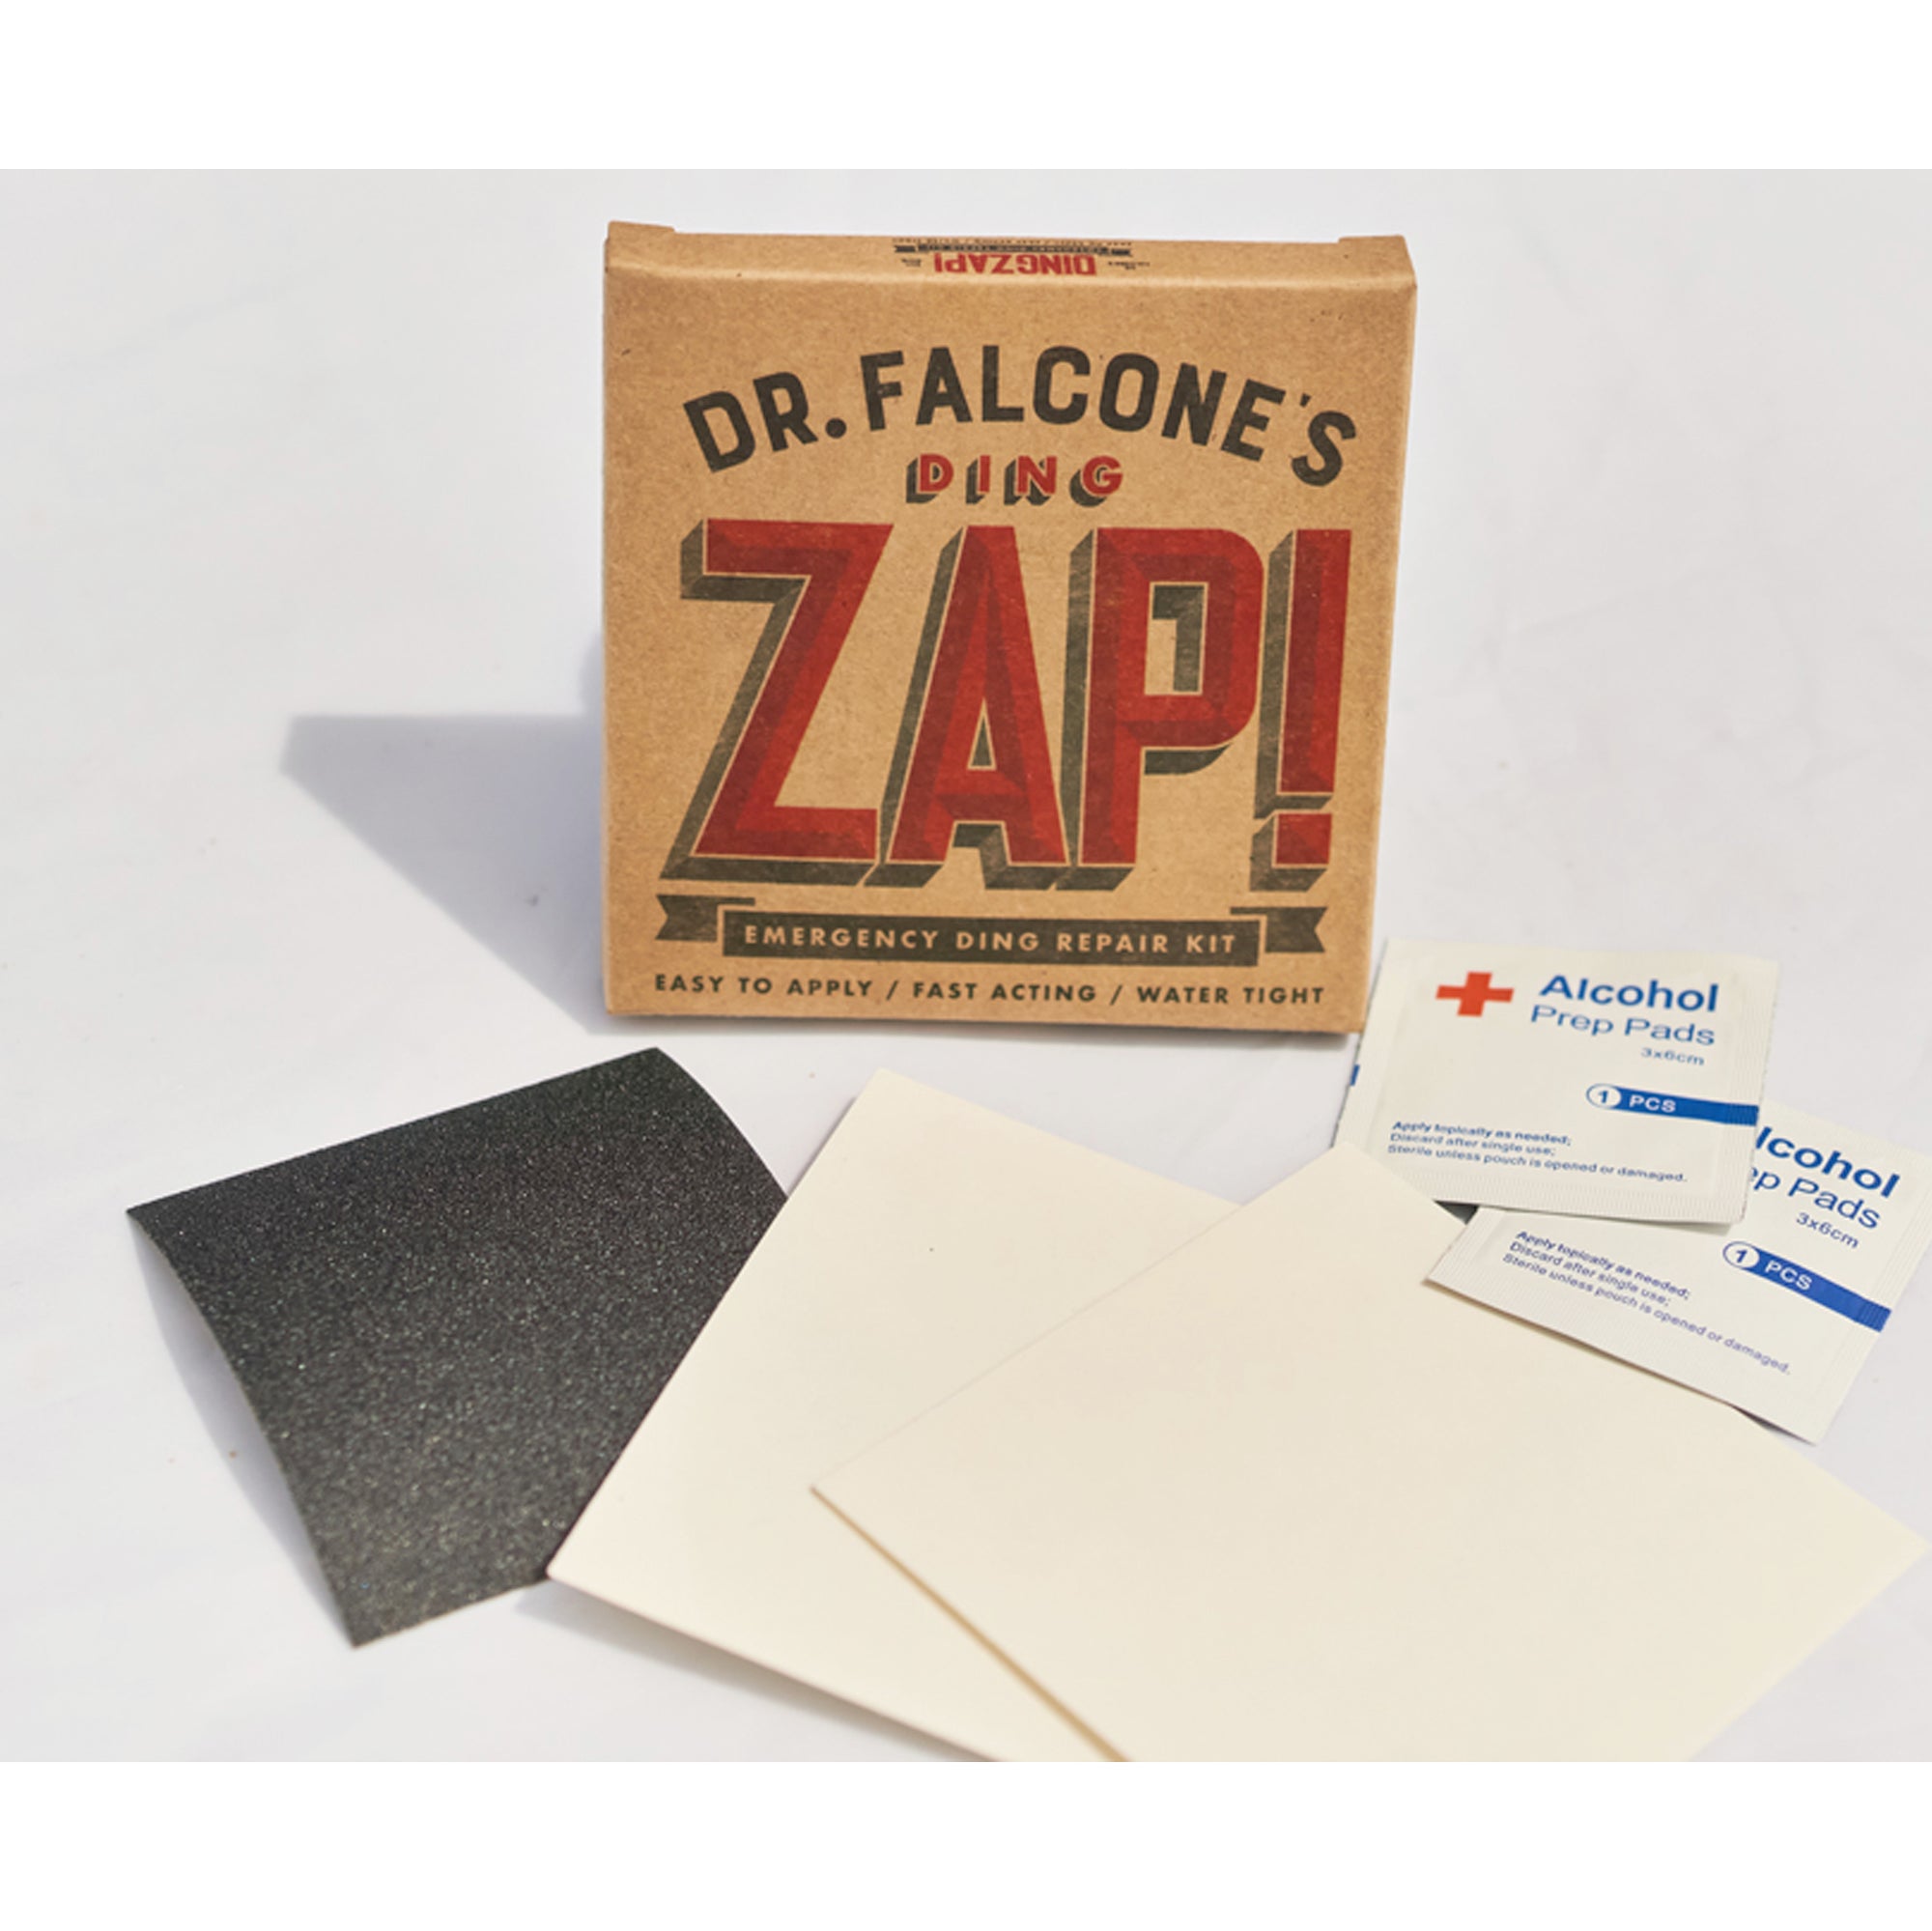 Dr. Falcone's Ding Zap! Emergency Ding Repair Kit